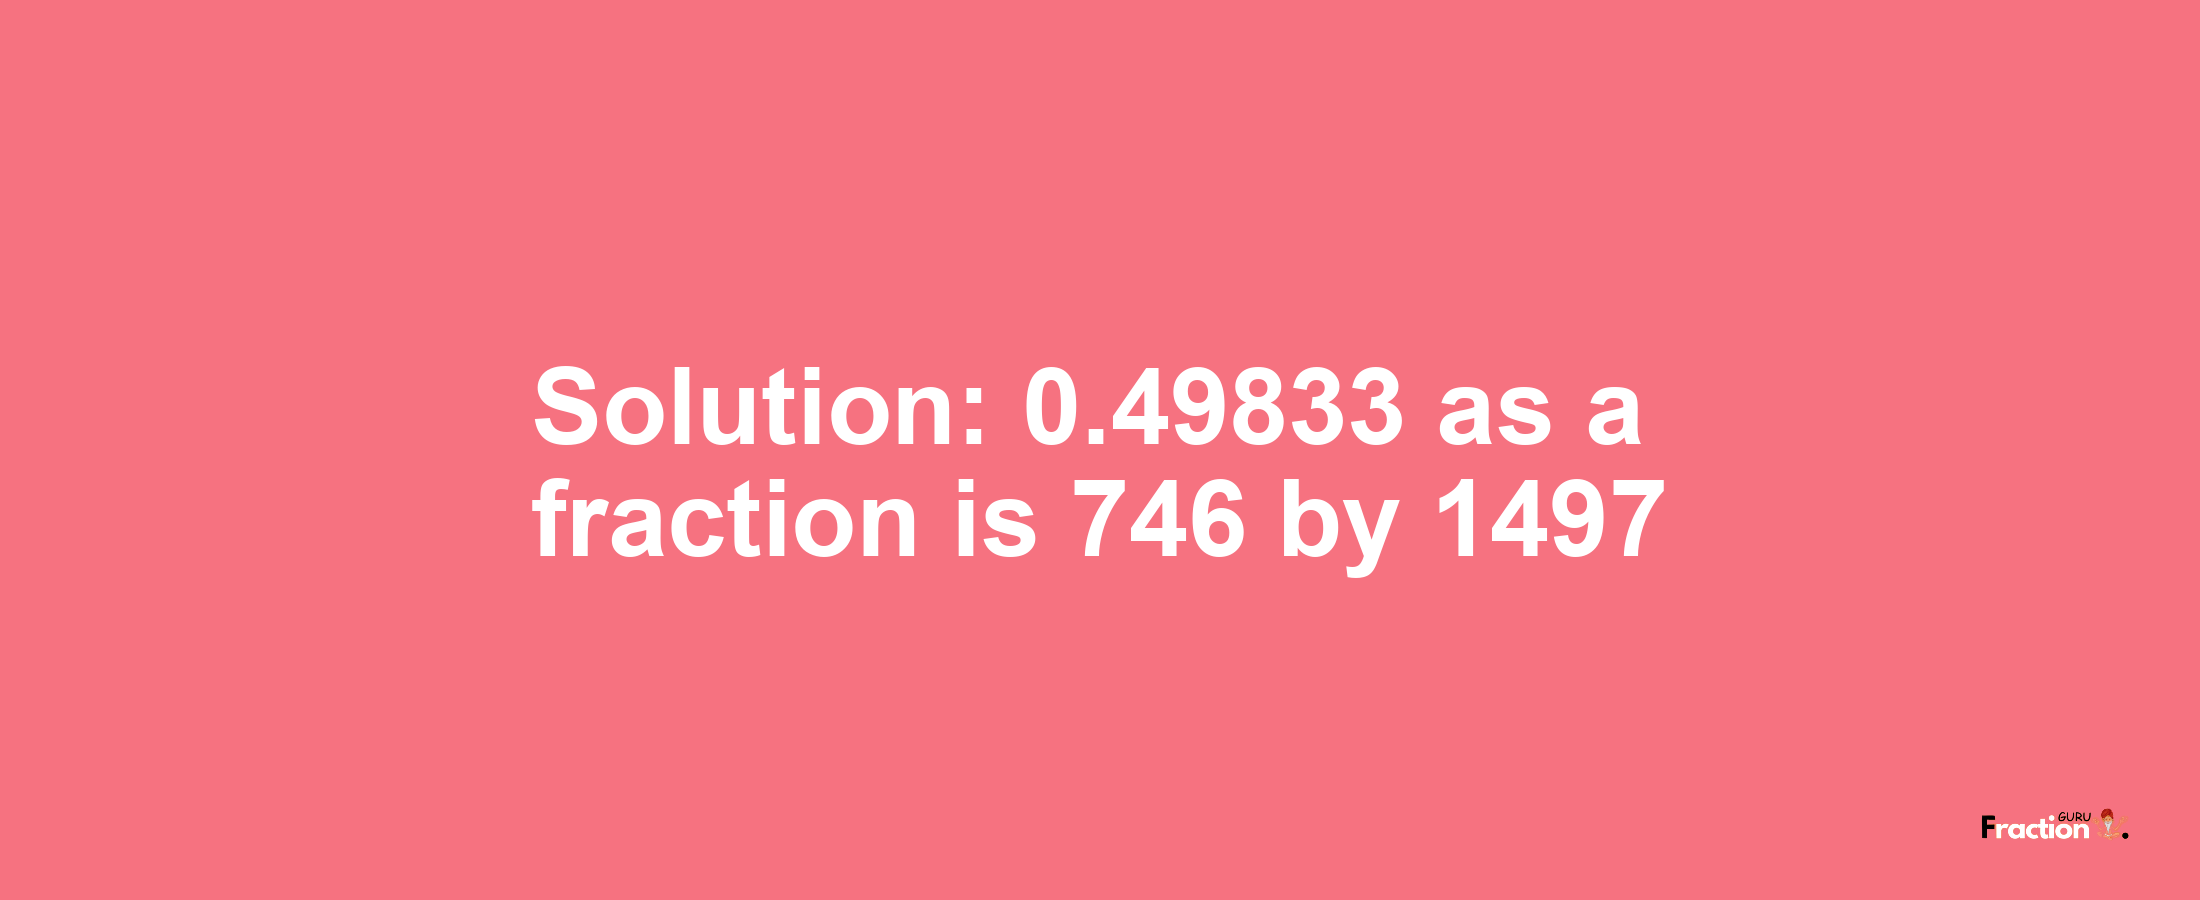 Solution:0.49833 as a fraction is 746/1497